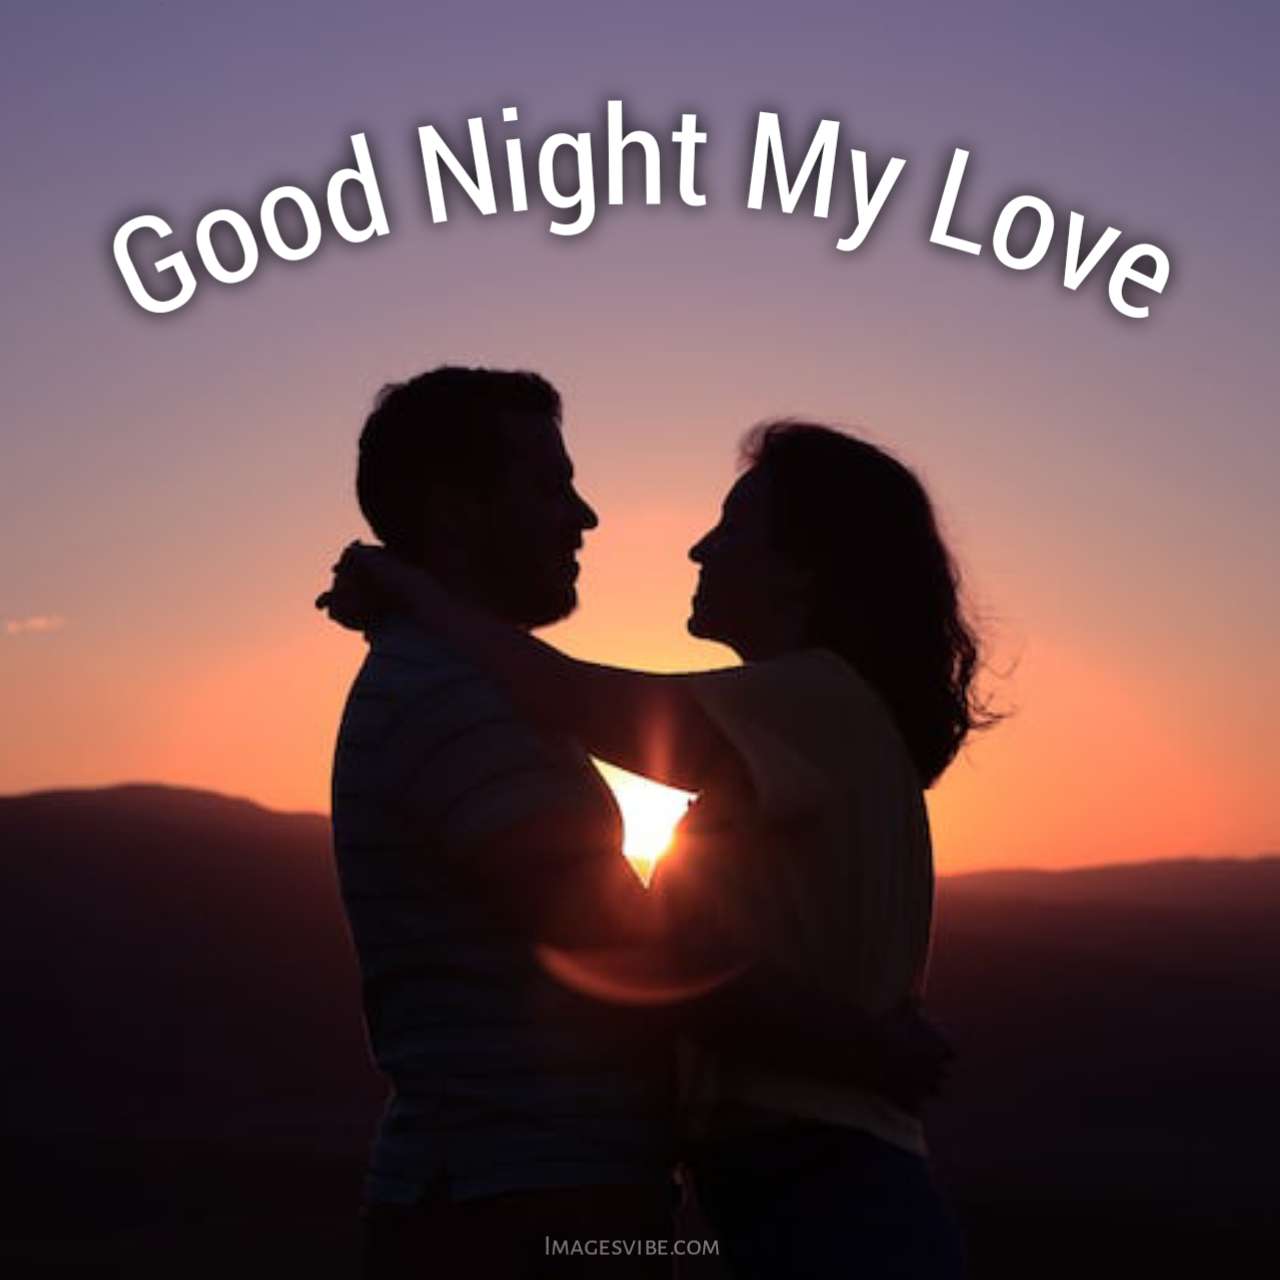 Good Night Images With Love3 